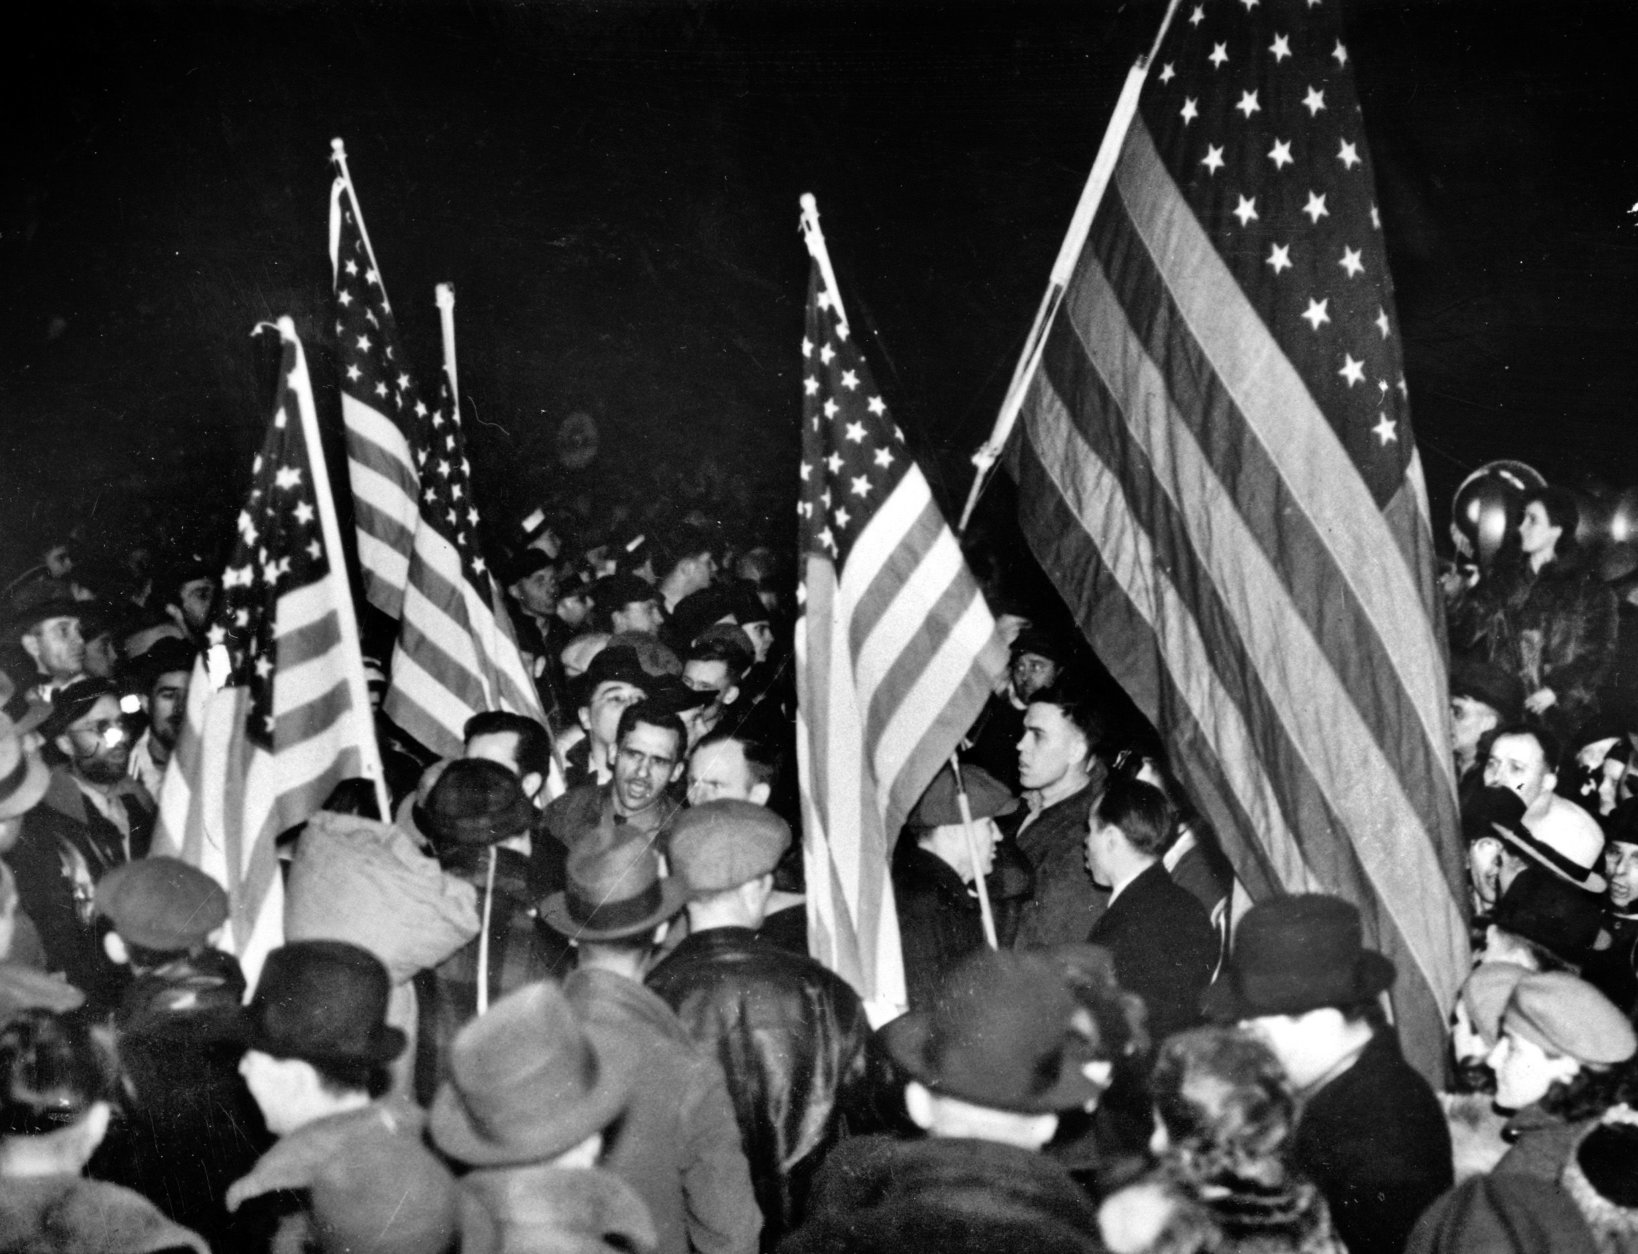 FILE - In this Feb. 12, 1937 file photo, strikers at the General Motors Fisher body plant in Flint, Mich., wave U.S. flags during the Great Depression. At its peak in the early 1970s, GM employed 80,000 people in Flint who cashed paychecks strengthened by the United Auto Workers union born in the city. Some 200,000 people lived in the city's limits, alongside sprawling factories, booming commerce, model schools and thriving arts. (AP Photo/File)